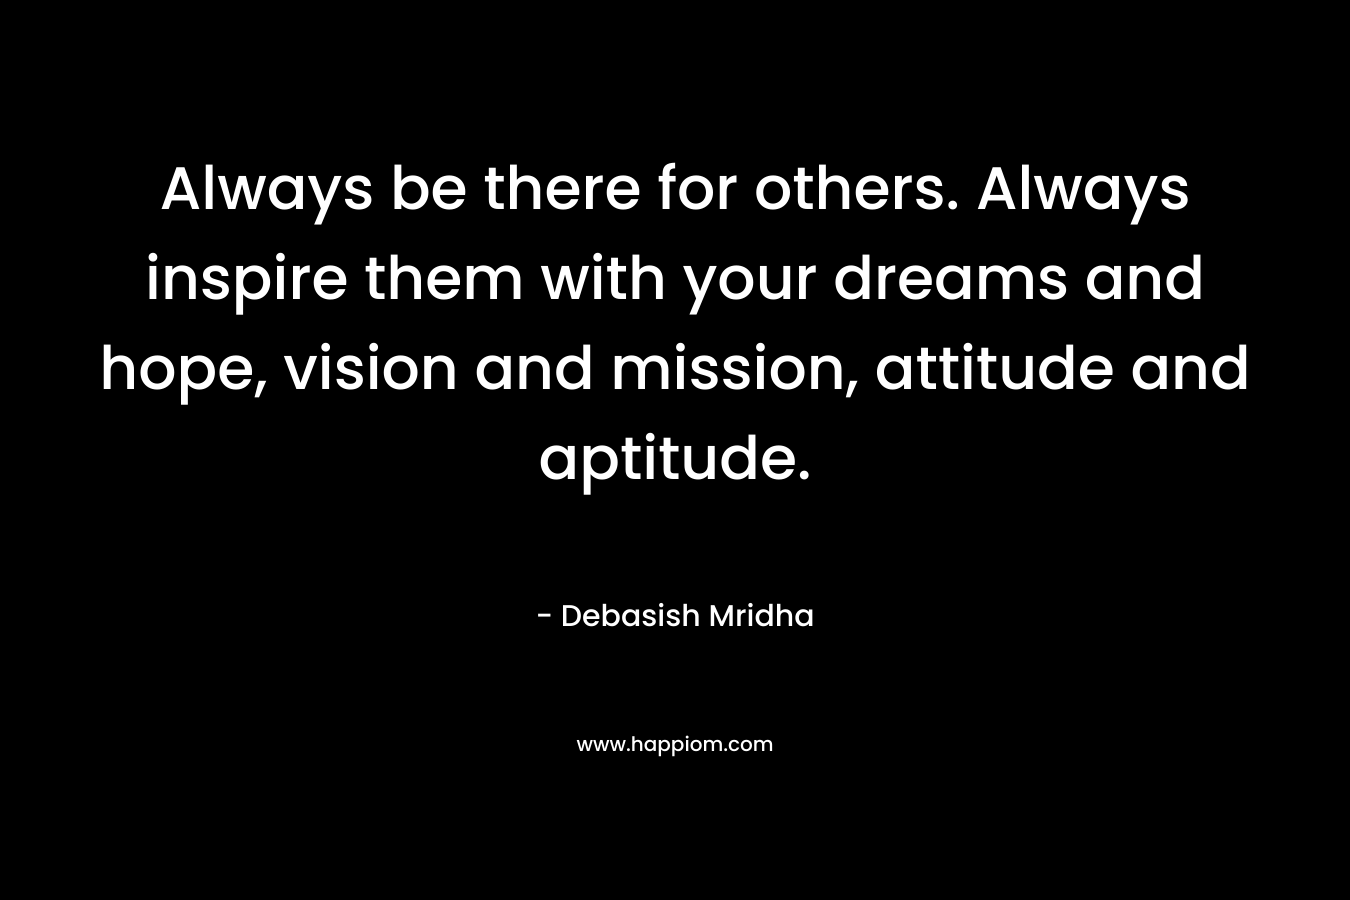 Always be there for others. Always inspire them with your dreams and hope, vision and mission, attitude and aptitude.